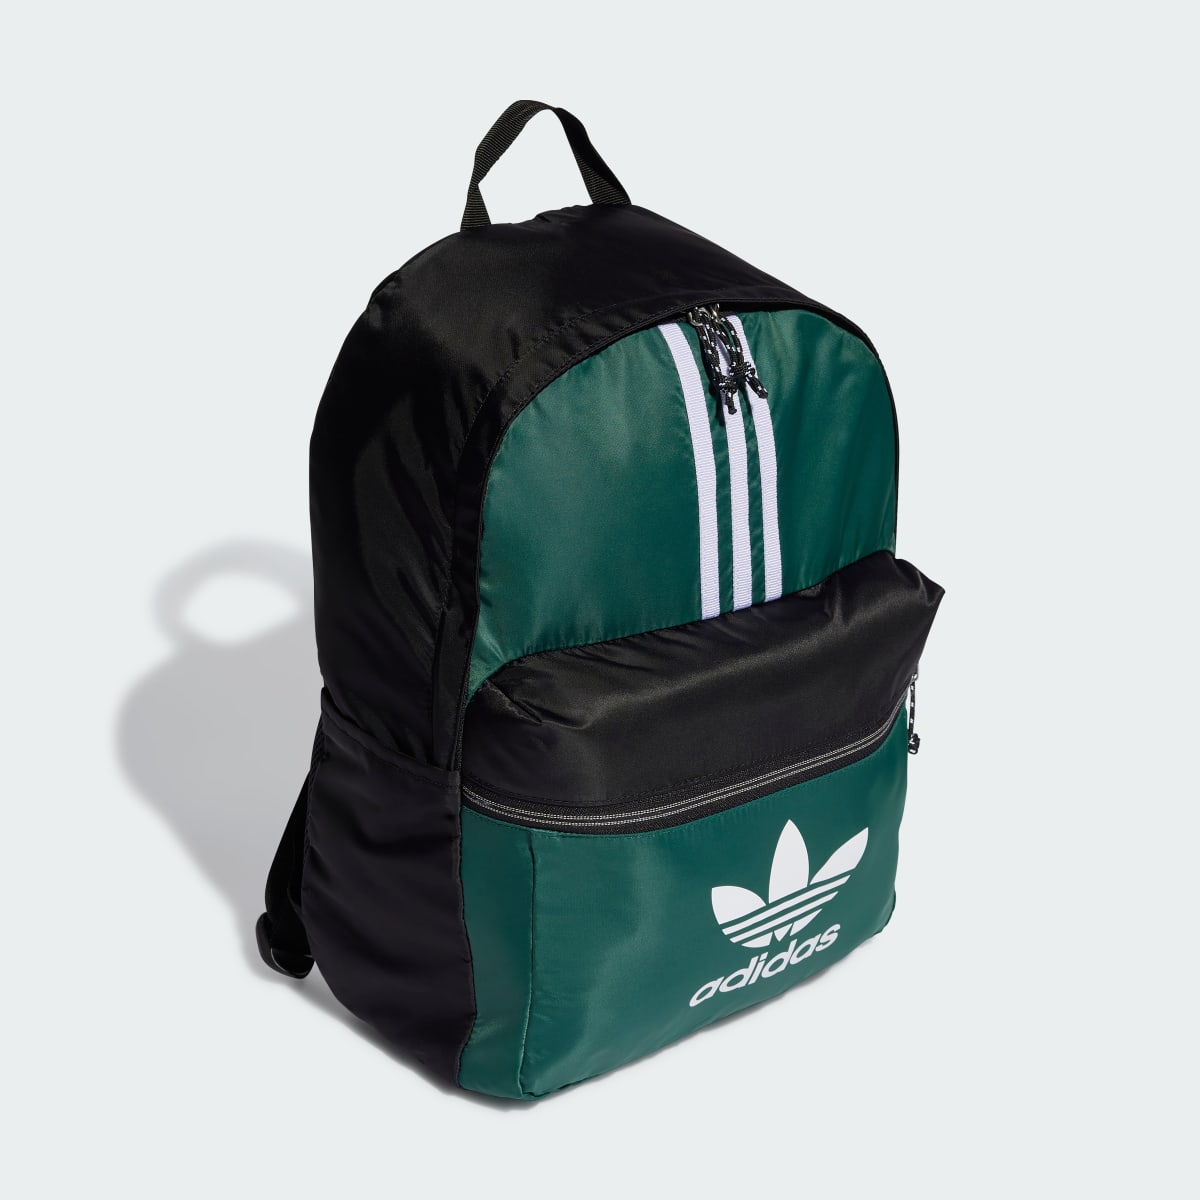 Adidas Adicolor Archive Backpack. 4